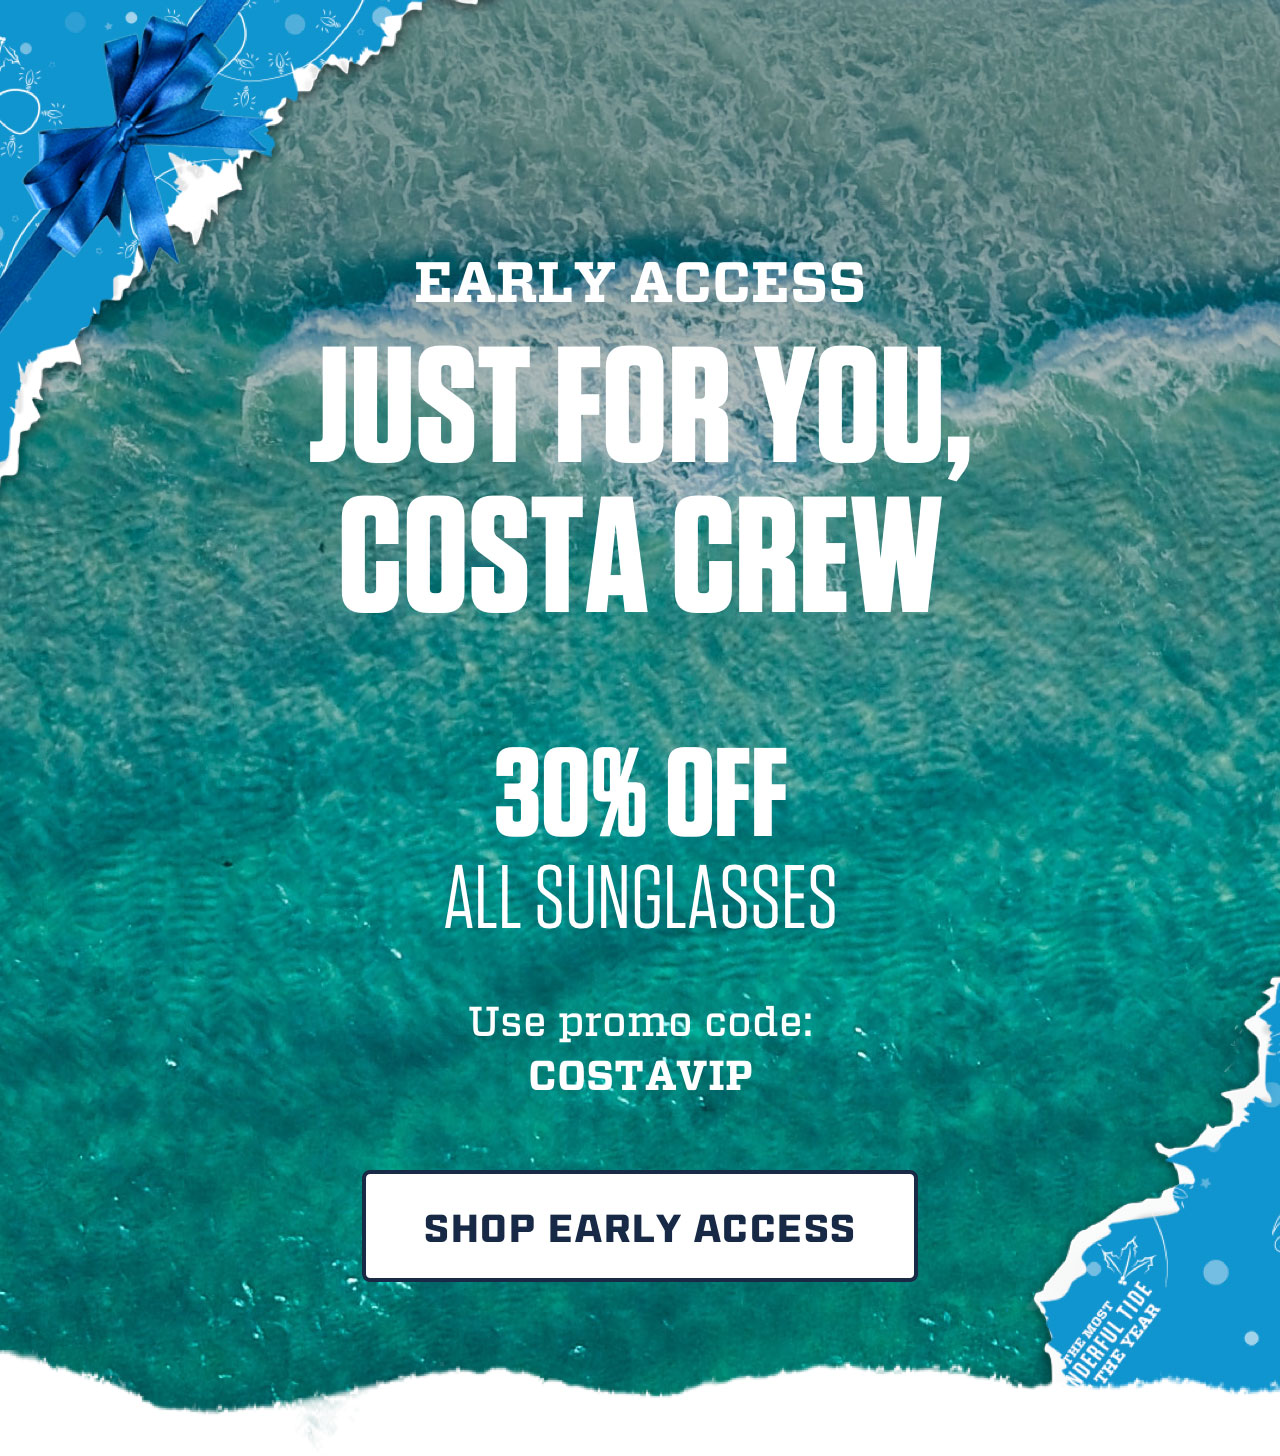 


EARLY ACCESS
JUST FOR YOU,
COSTA CREW

30% OFF
ALL SUNGLASSES

Use promo code:
COSTAVIP

[ SHOP EARLY ACCESS ]

									